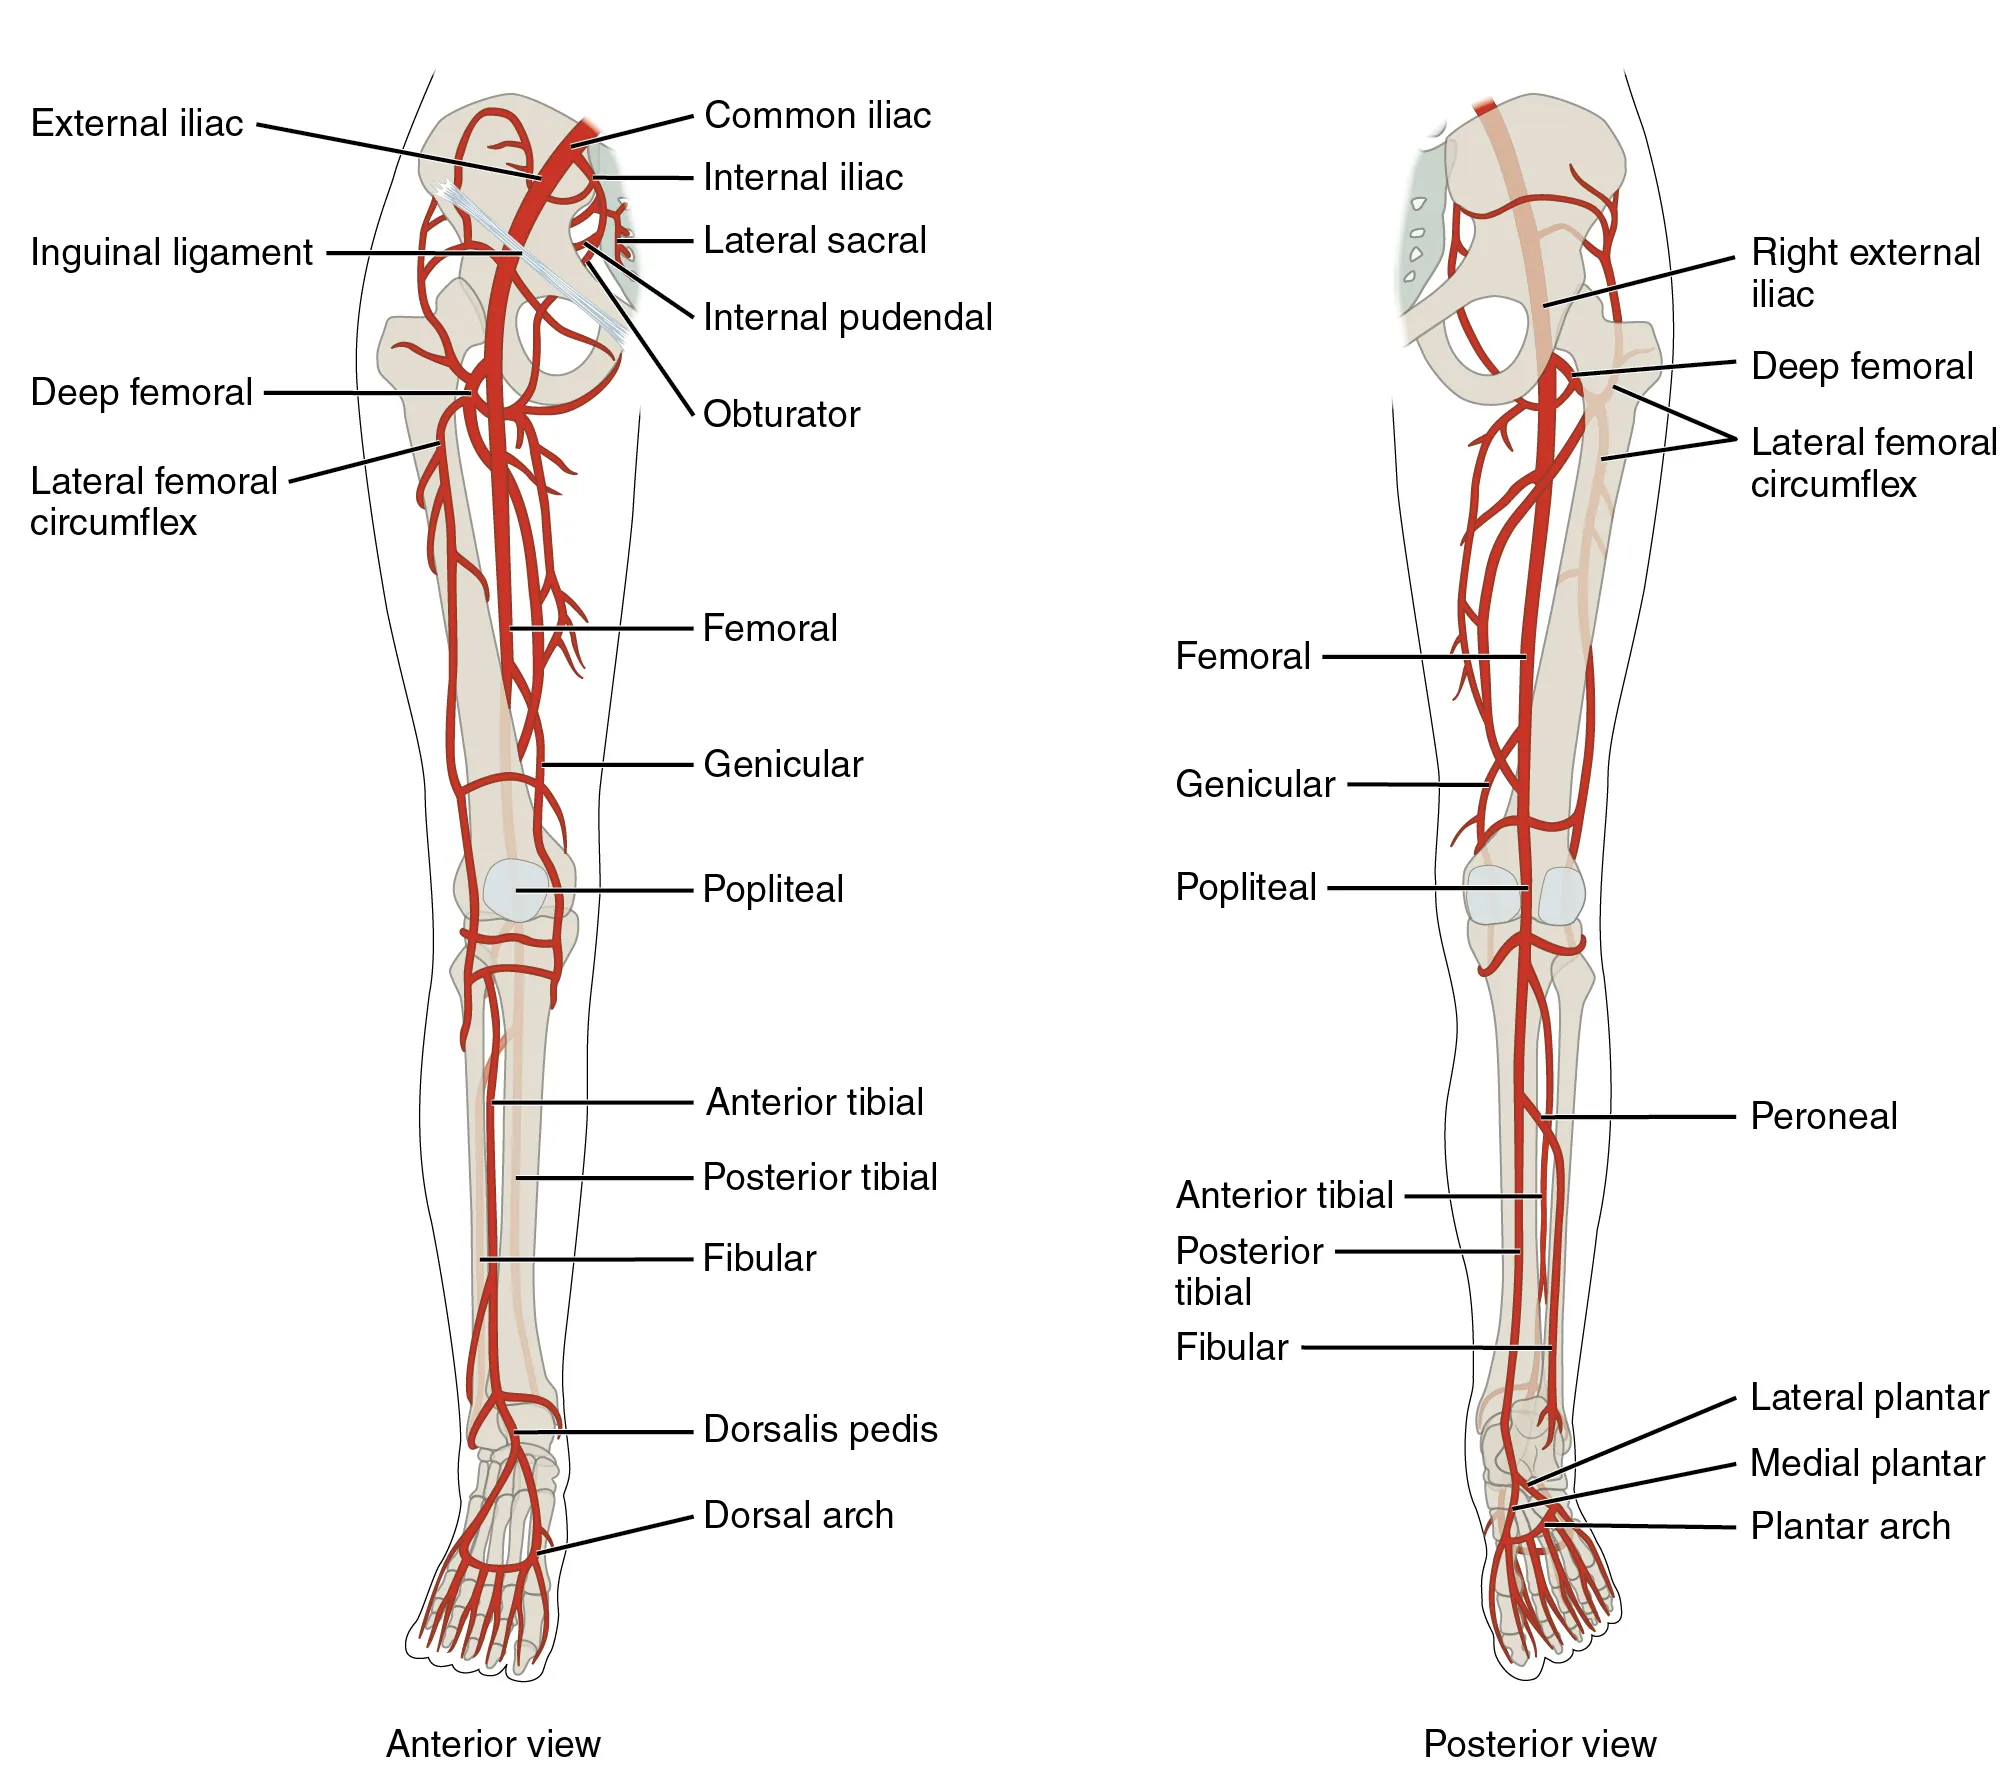 The left panel shows the anterior view of arteries in the legs, and the right panel shows the posterior view.